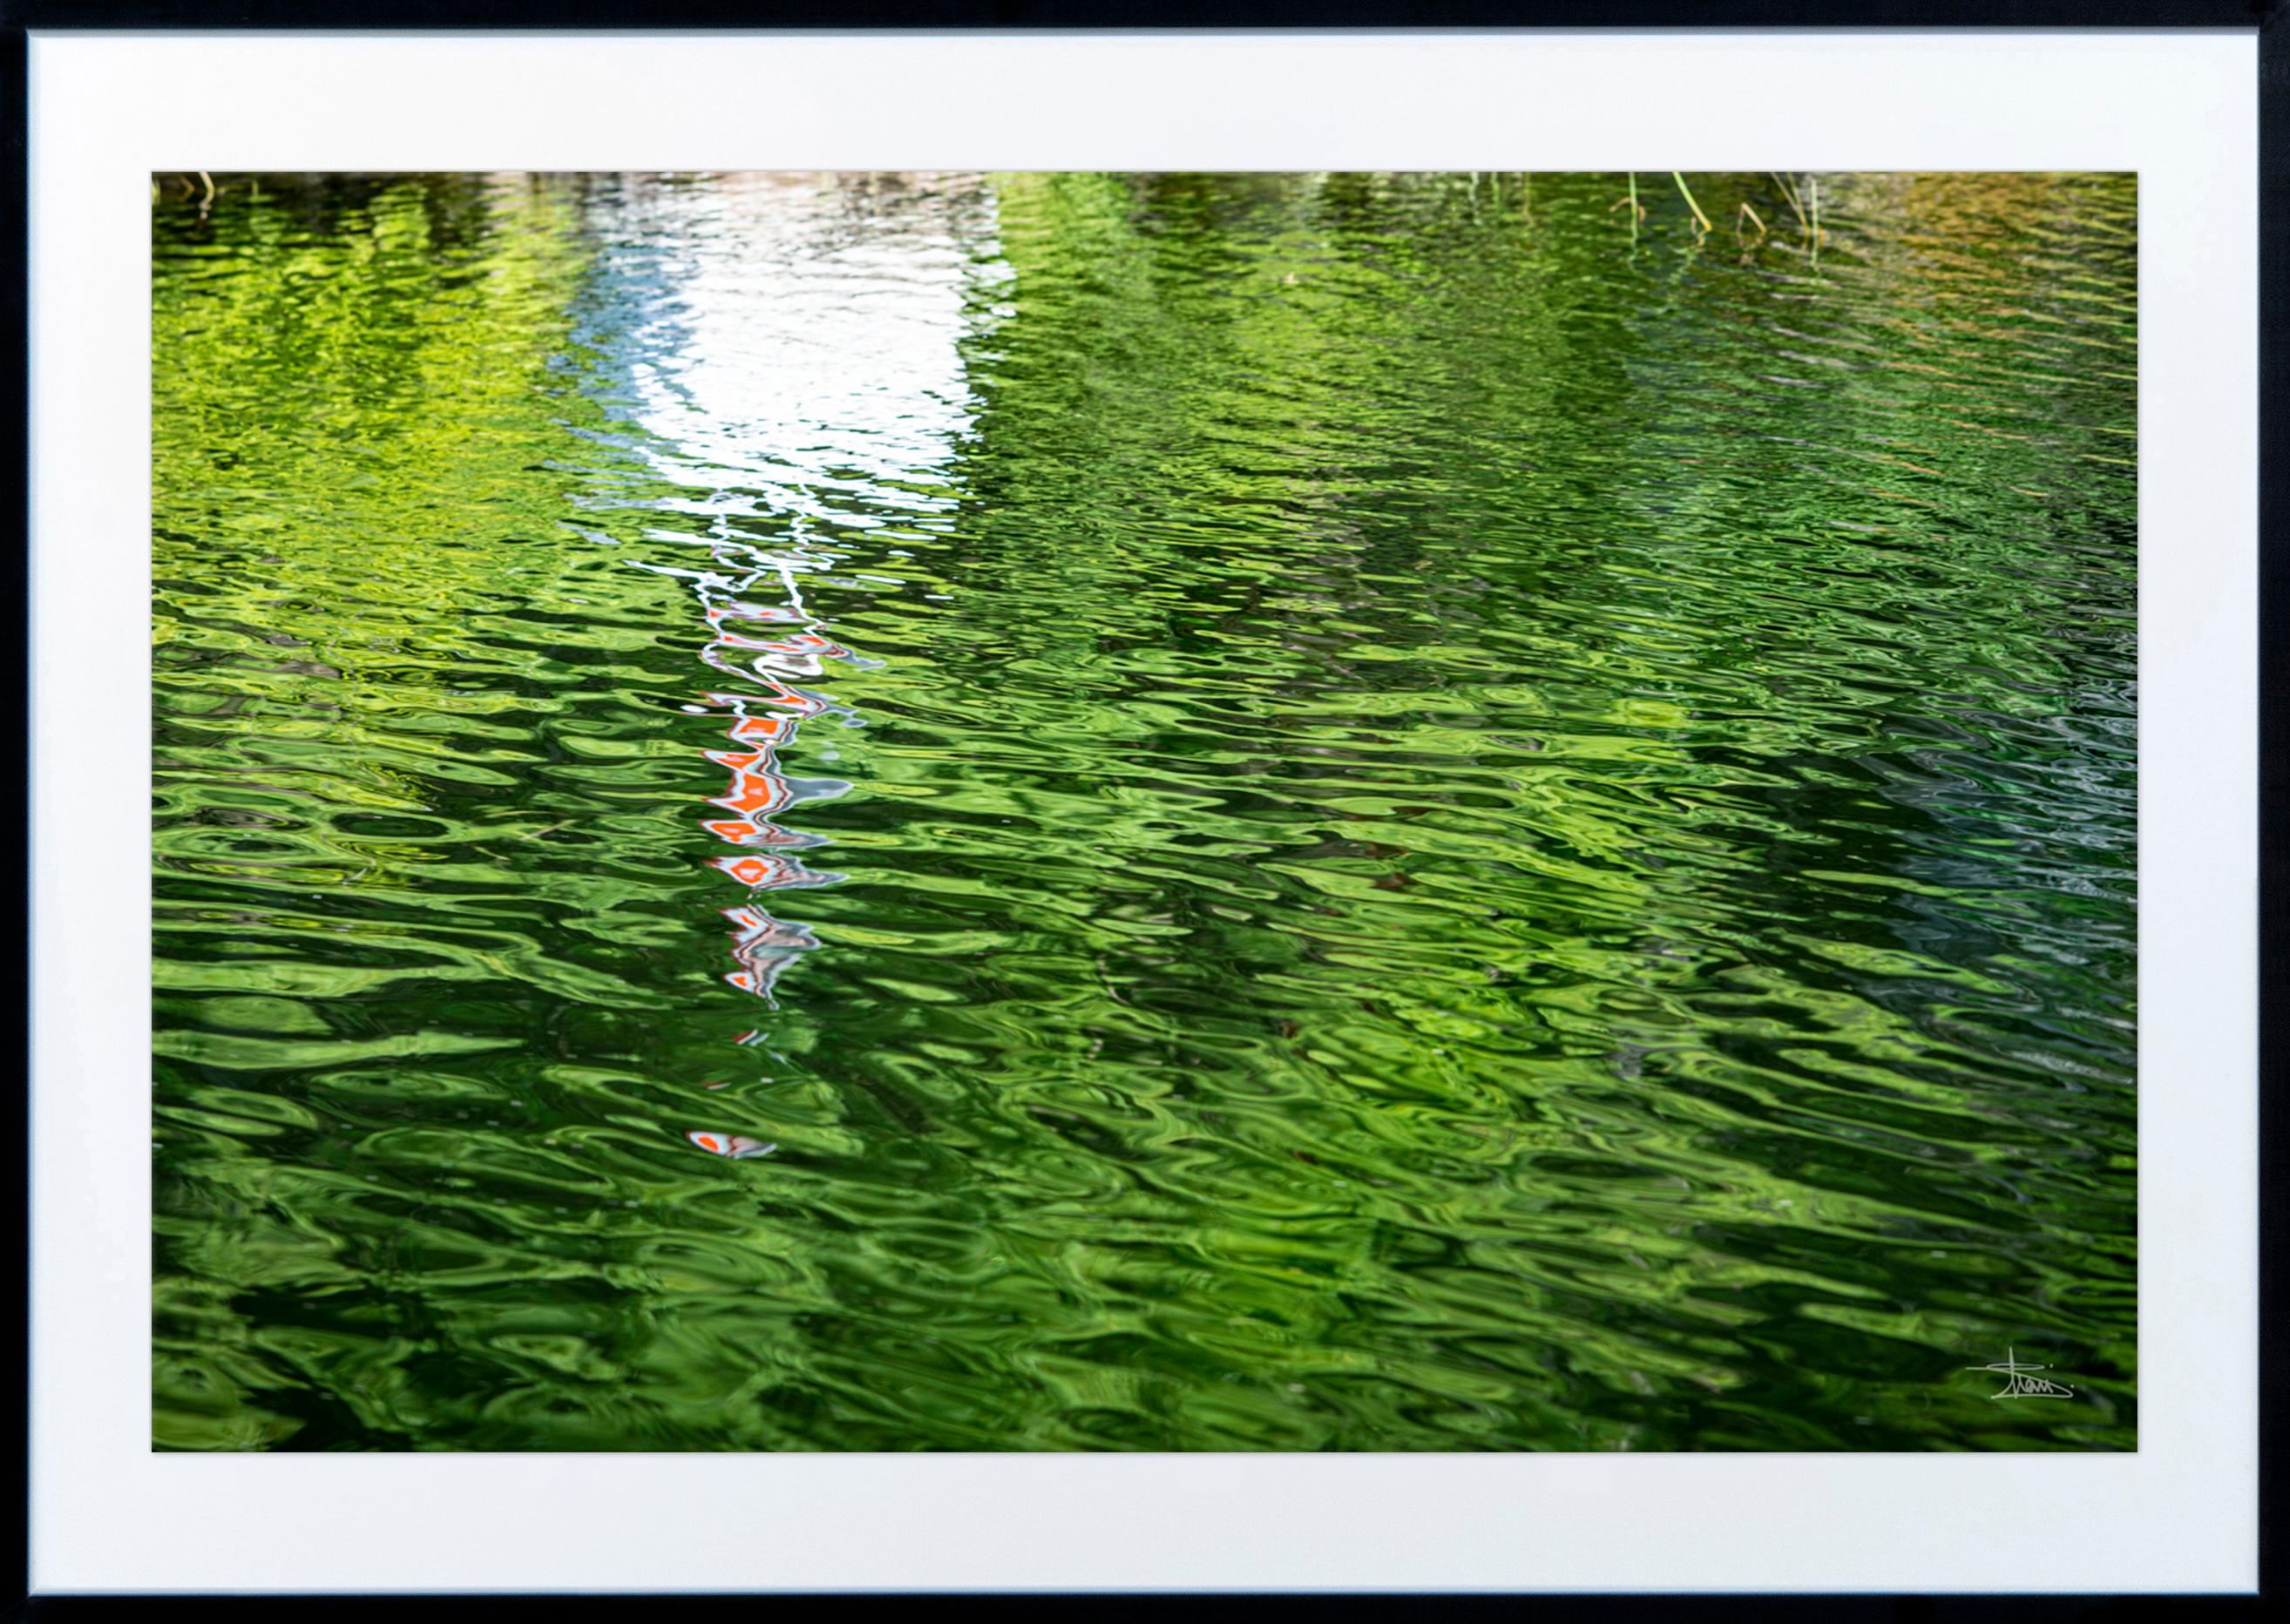 Lake Opinicon 1/8 - abstracted landscape, color photography, giclée print - Photograph by Shani Mootoo